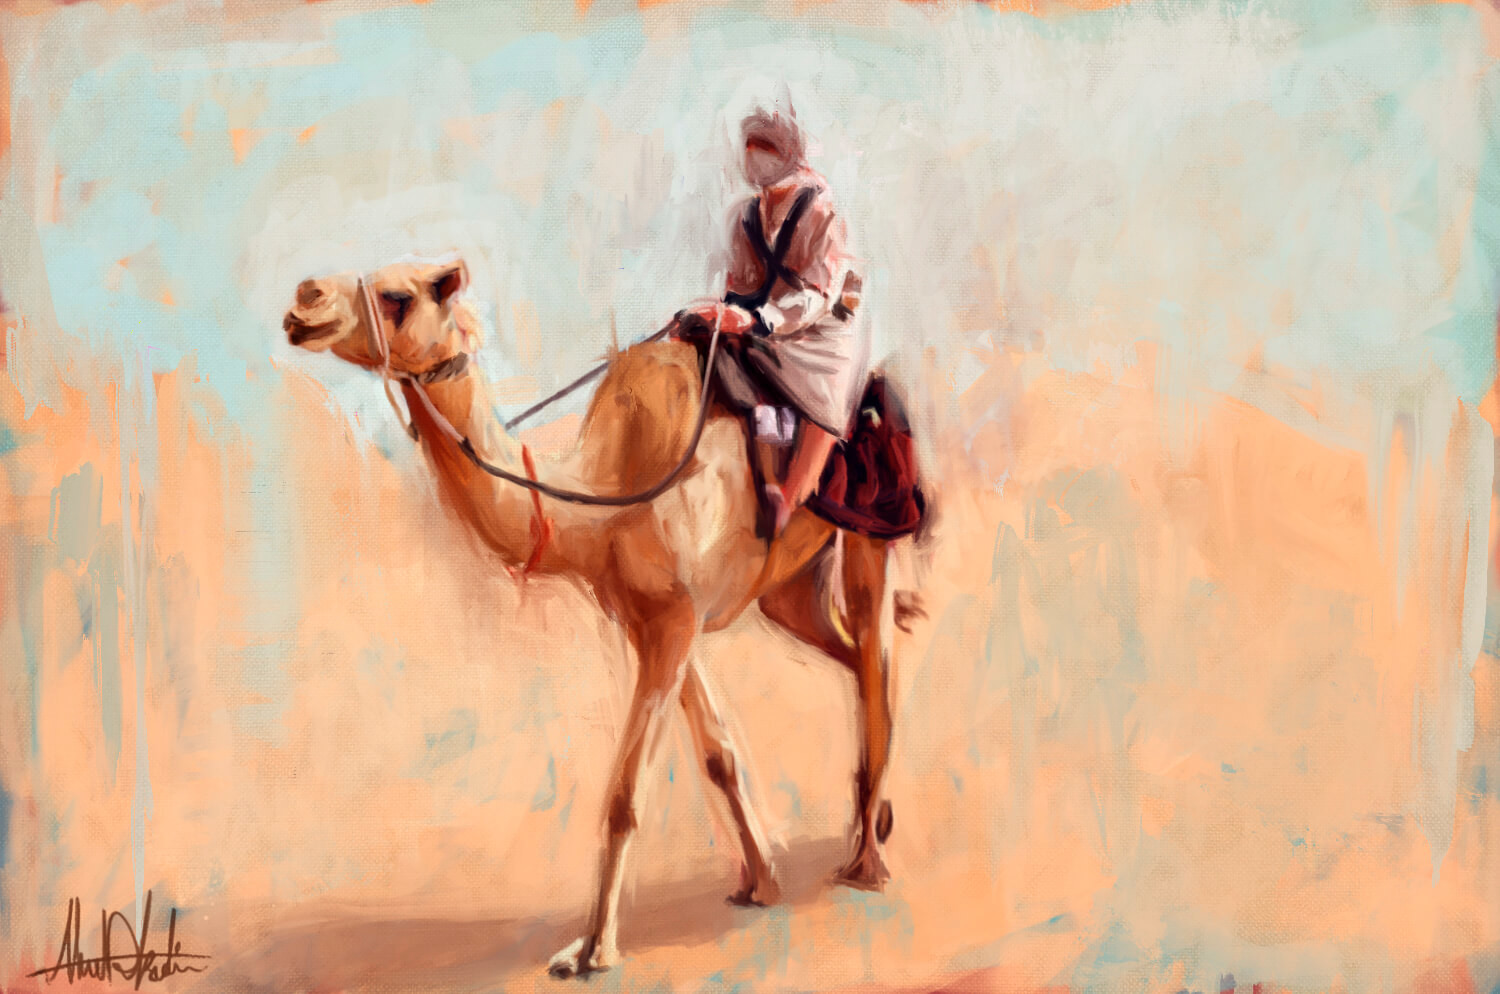 ahmad-kadi-digital-portrait-of-man-riding-a-camel-in-the-desert-painting-for-sale-looks-like-modern-oil-painting